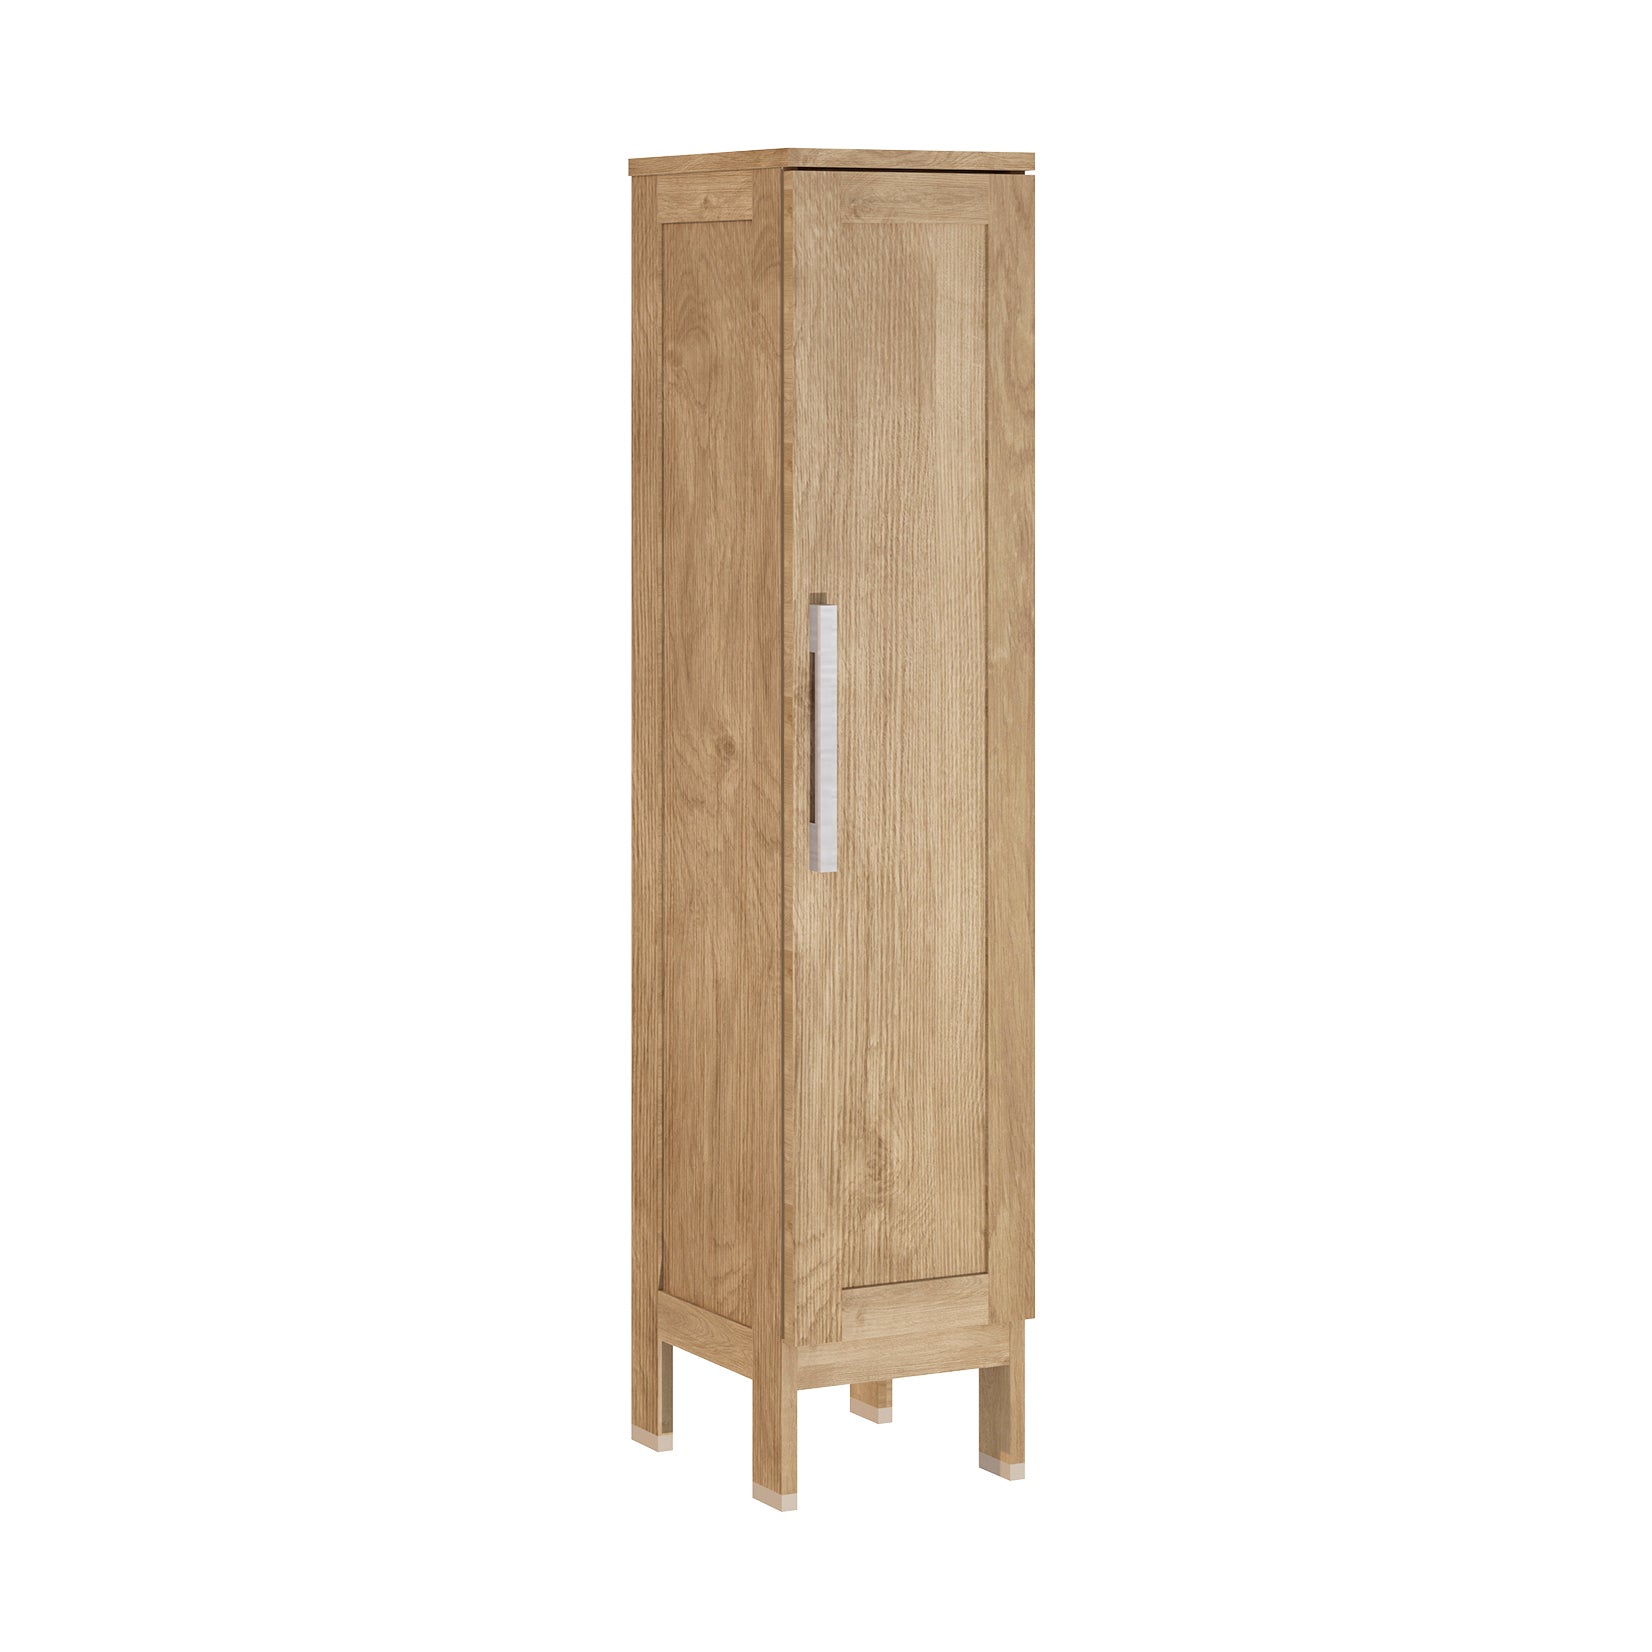 DAX Lakeside Side Cabinet 57 Inches Height